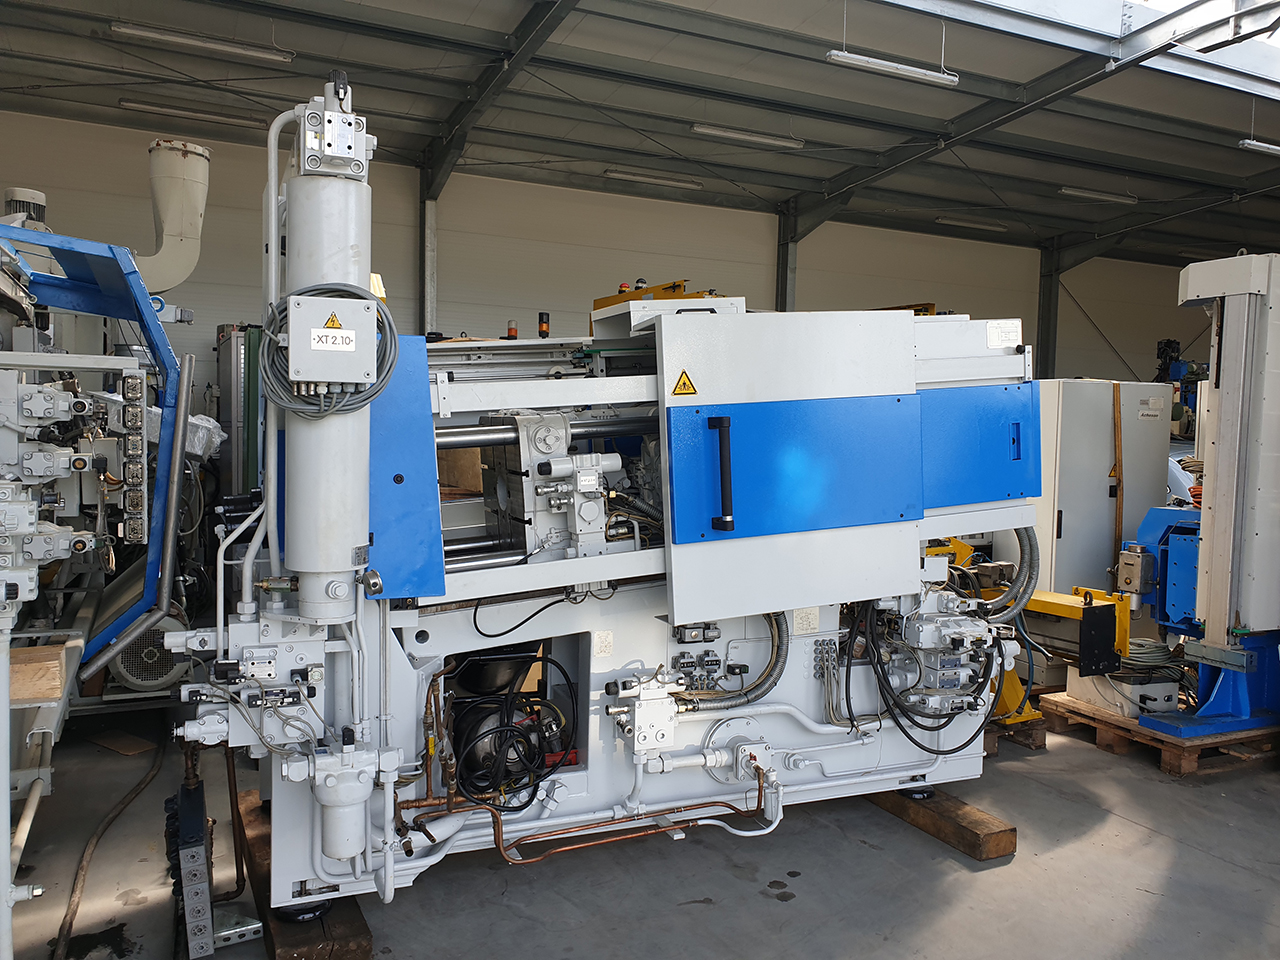 Reconditioning of Frech DAW 80 hot chamber die casting machine